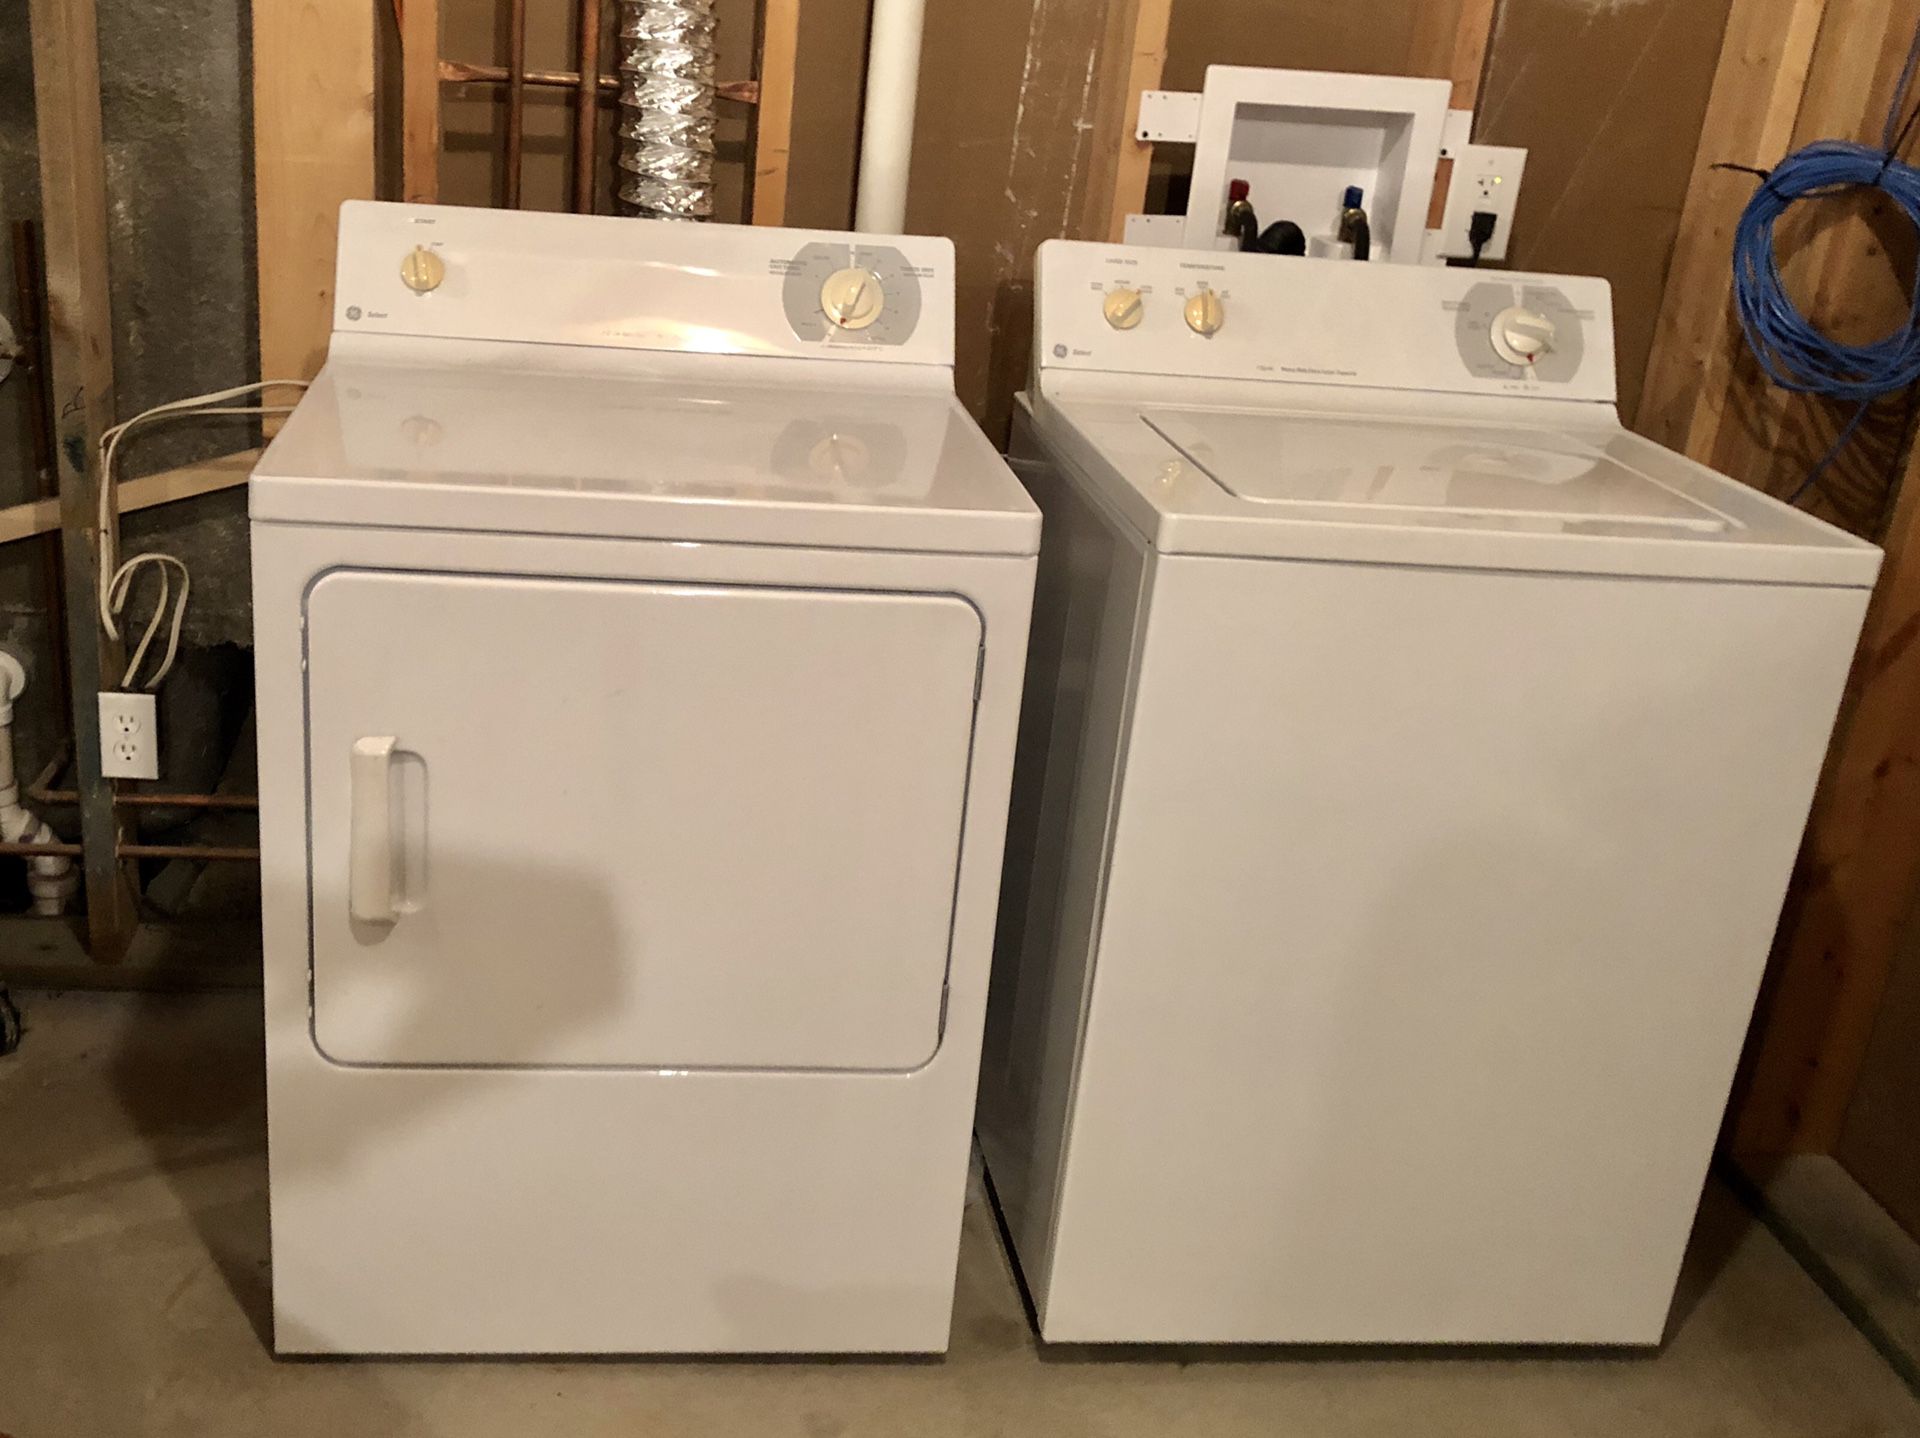 General Electric washer and dryer (sold as a set)